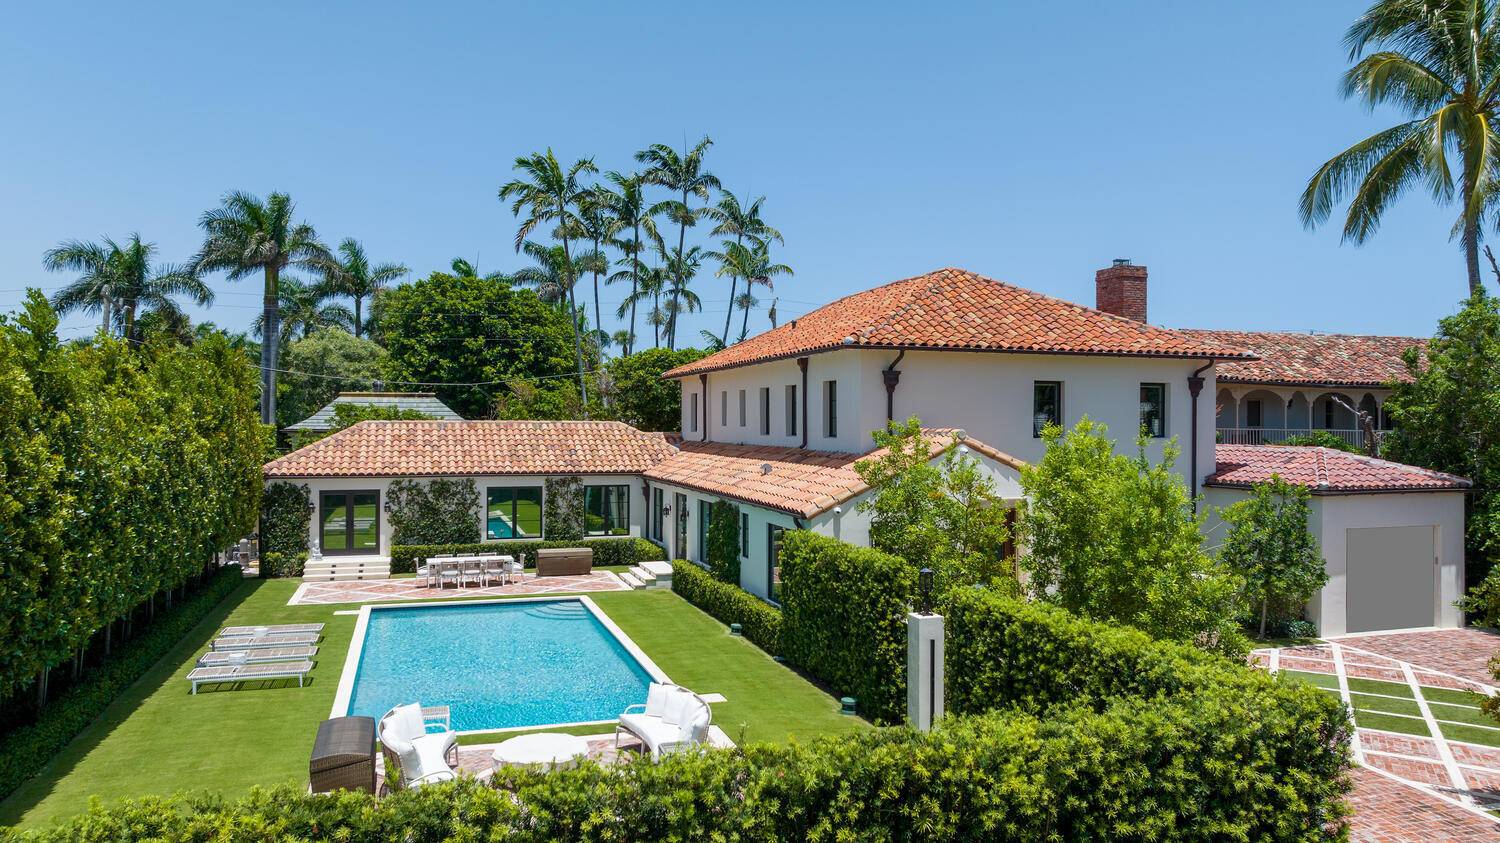 Newly customized 1920's Mediterranean home in the Estate Section of Palm Beach.